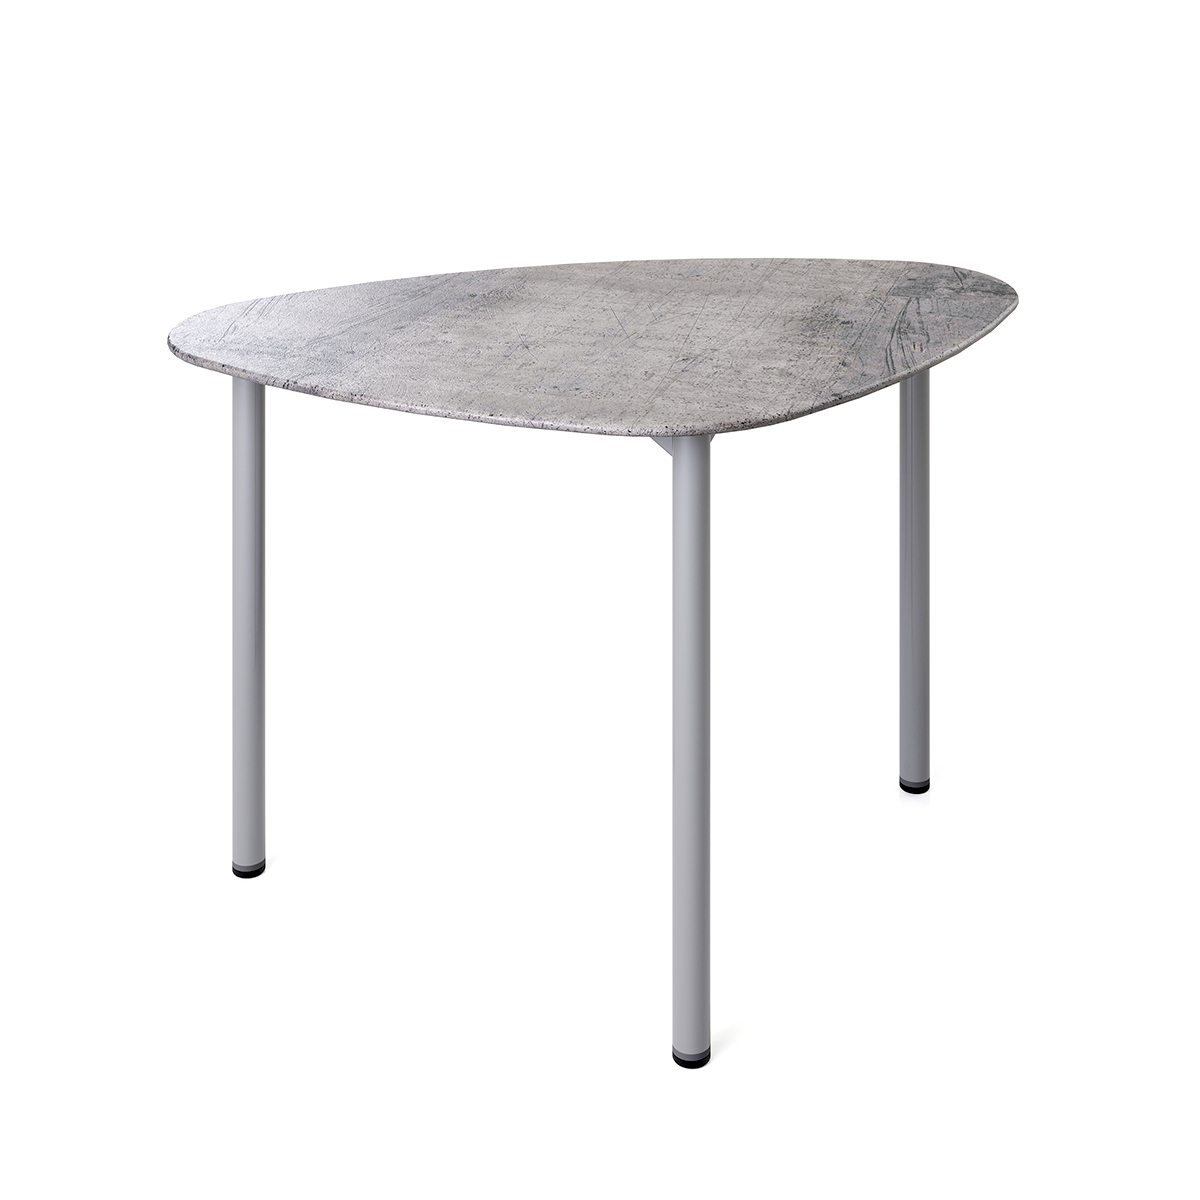 Flowform® Outdoor Clamshell Table